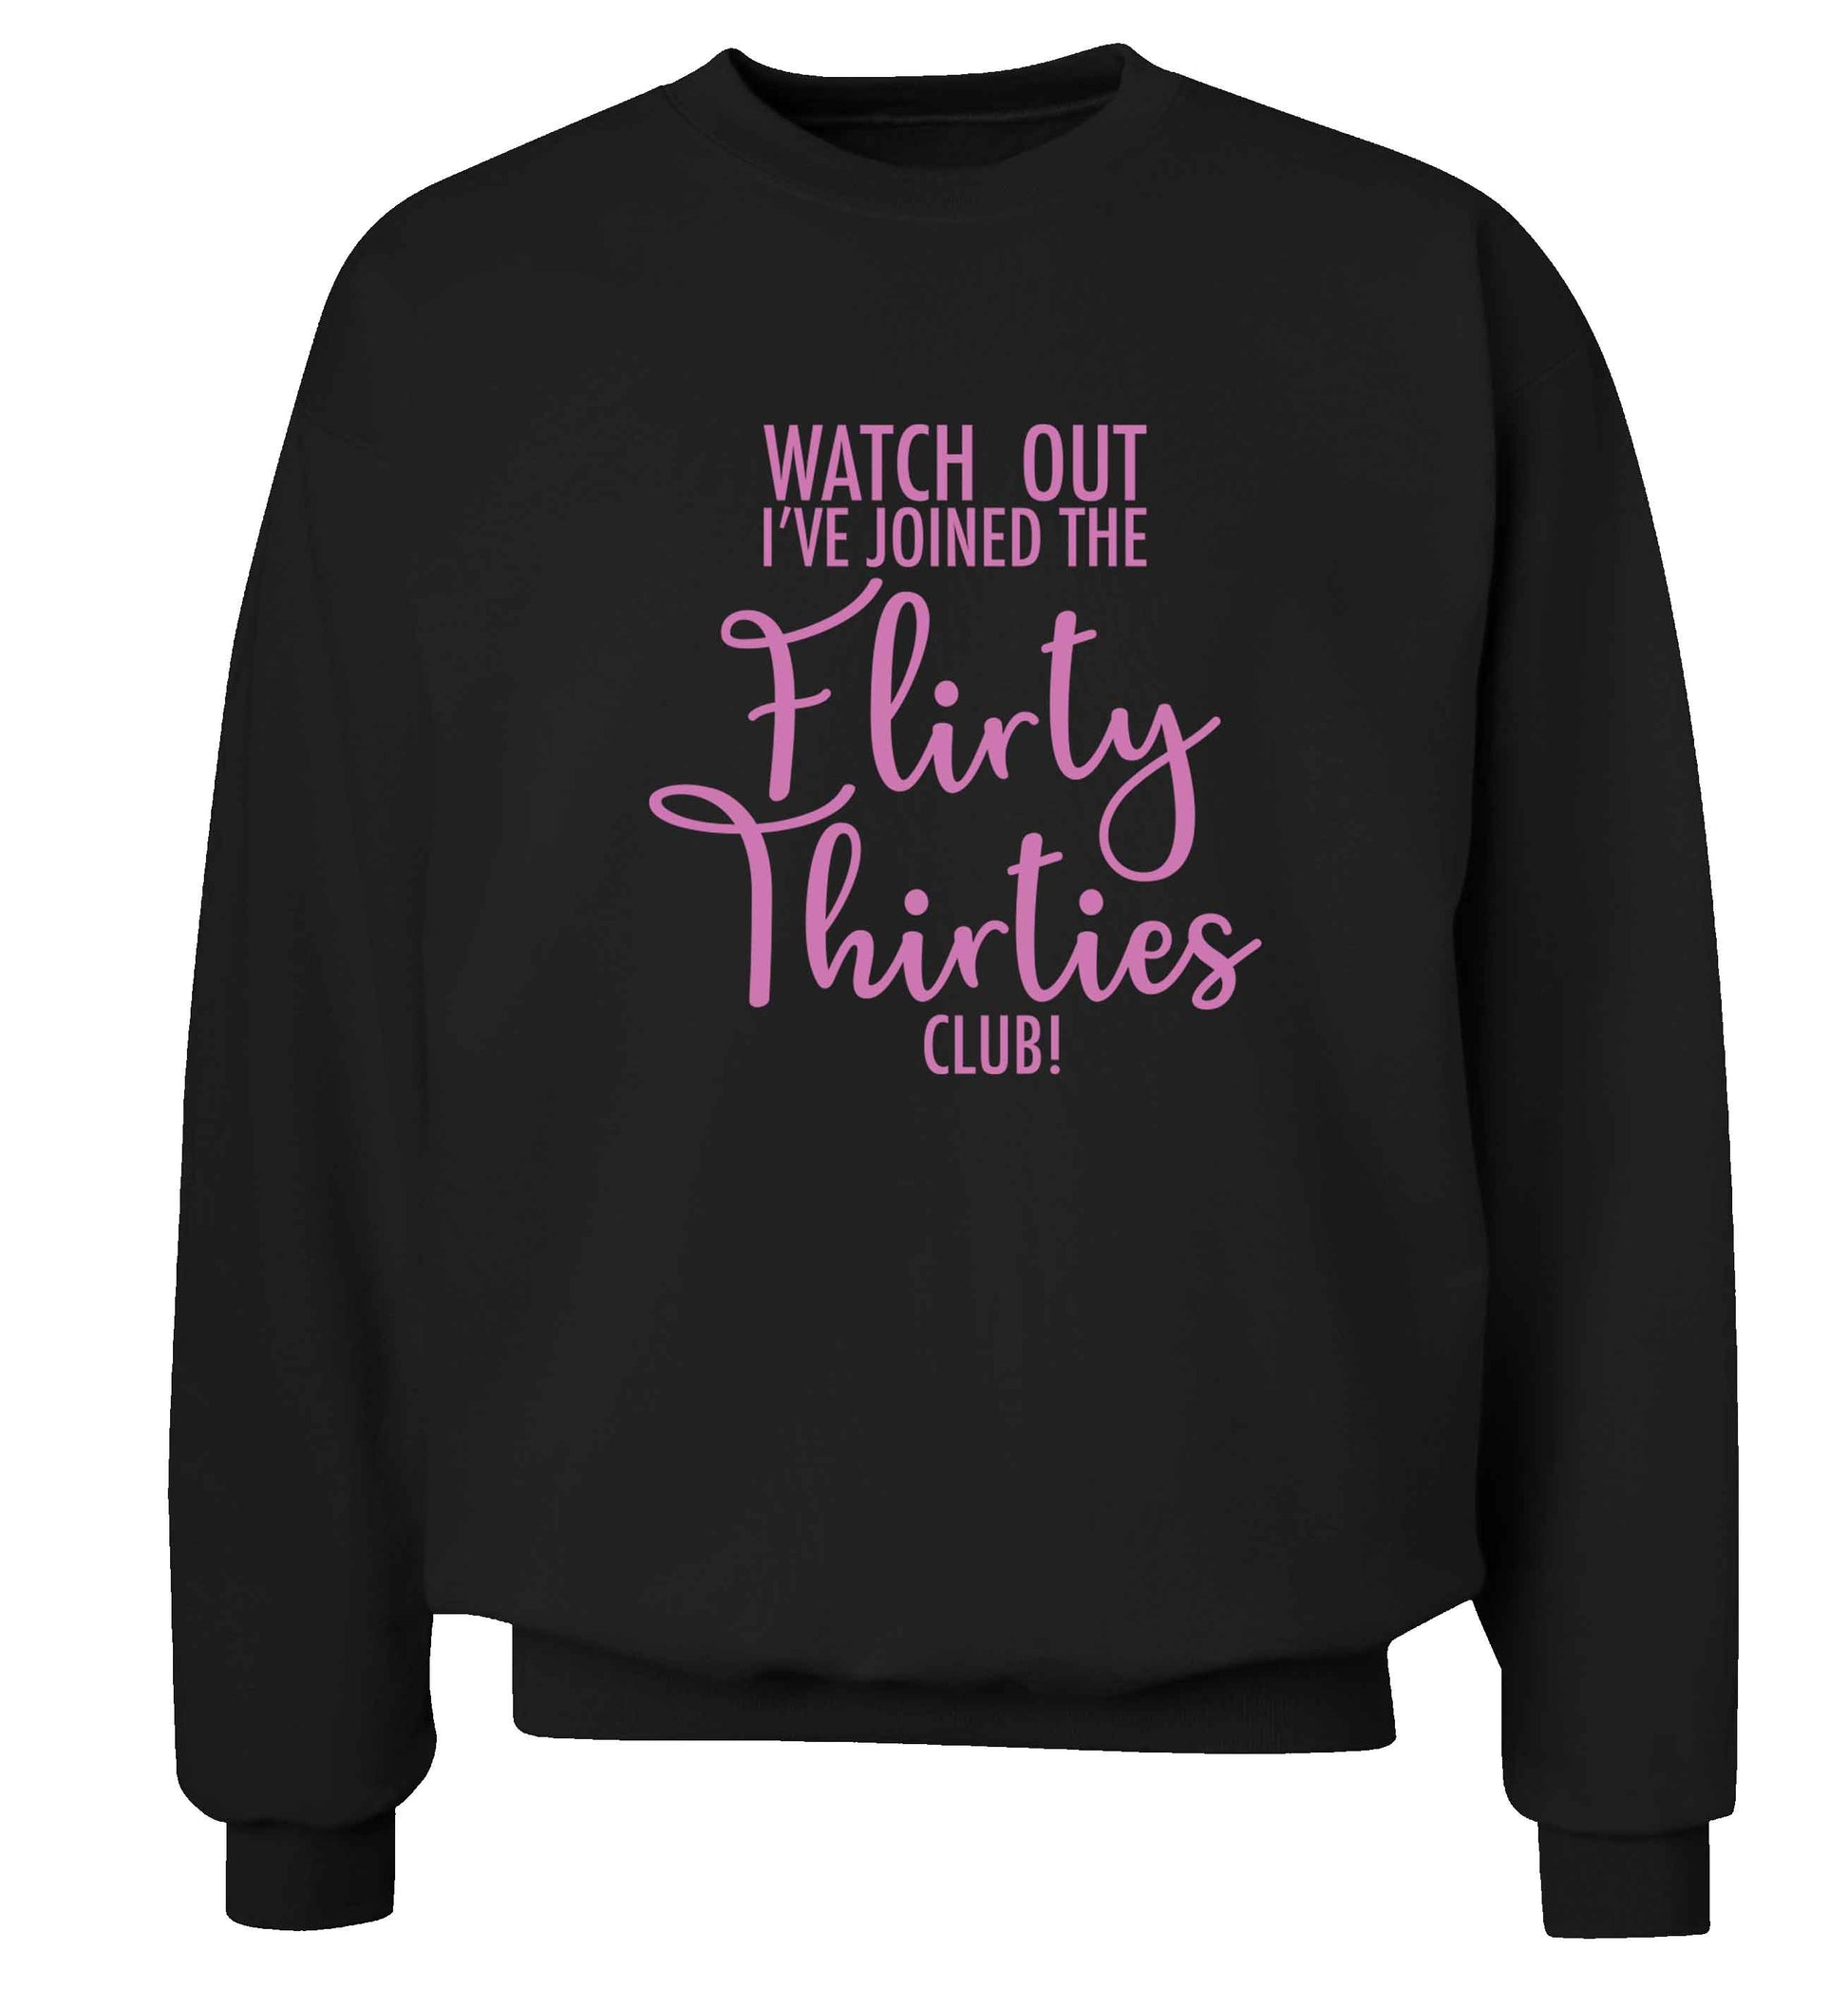 Watch out I've joined the flirty thirties club adult's unisex black sweater 2XL